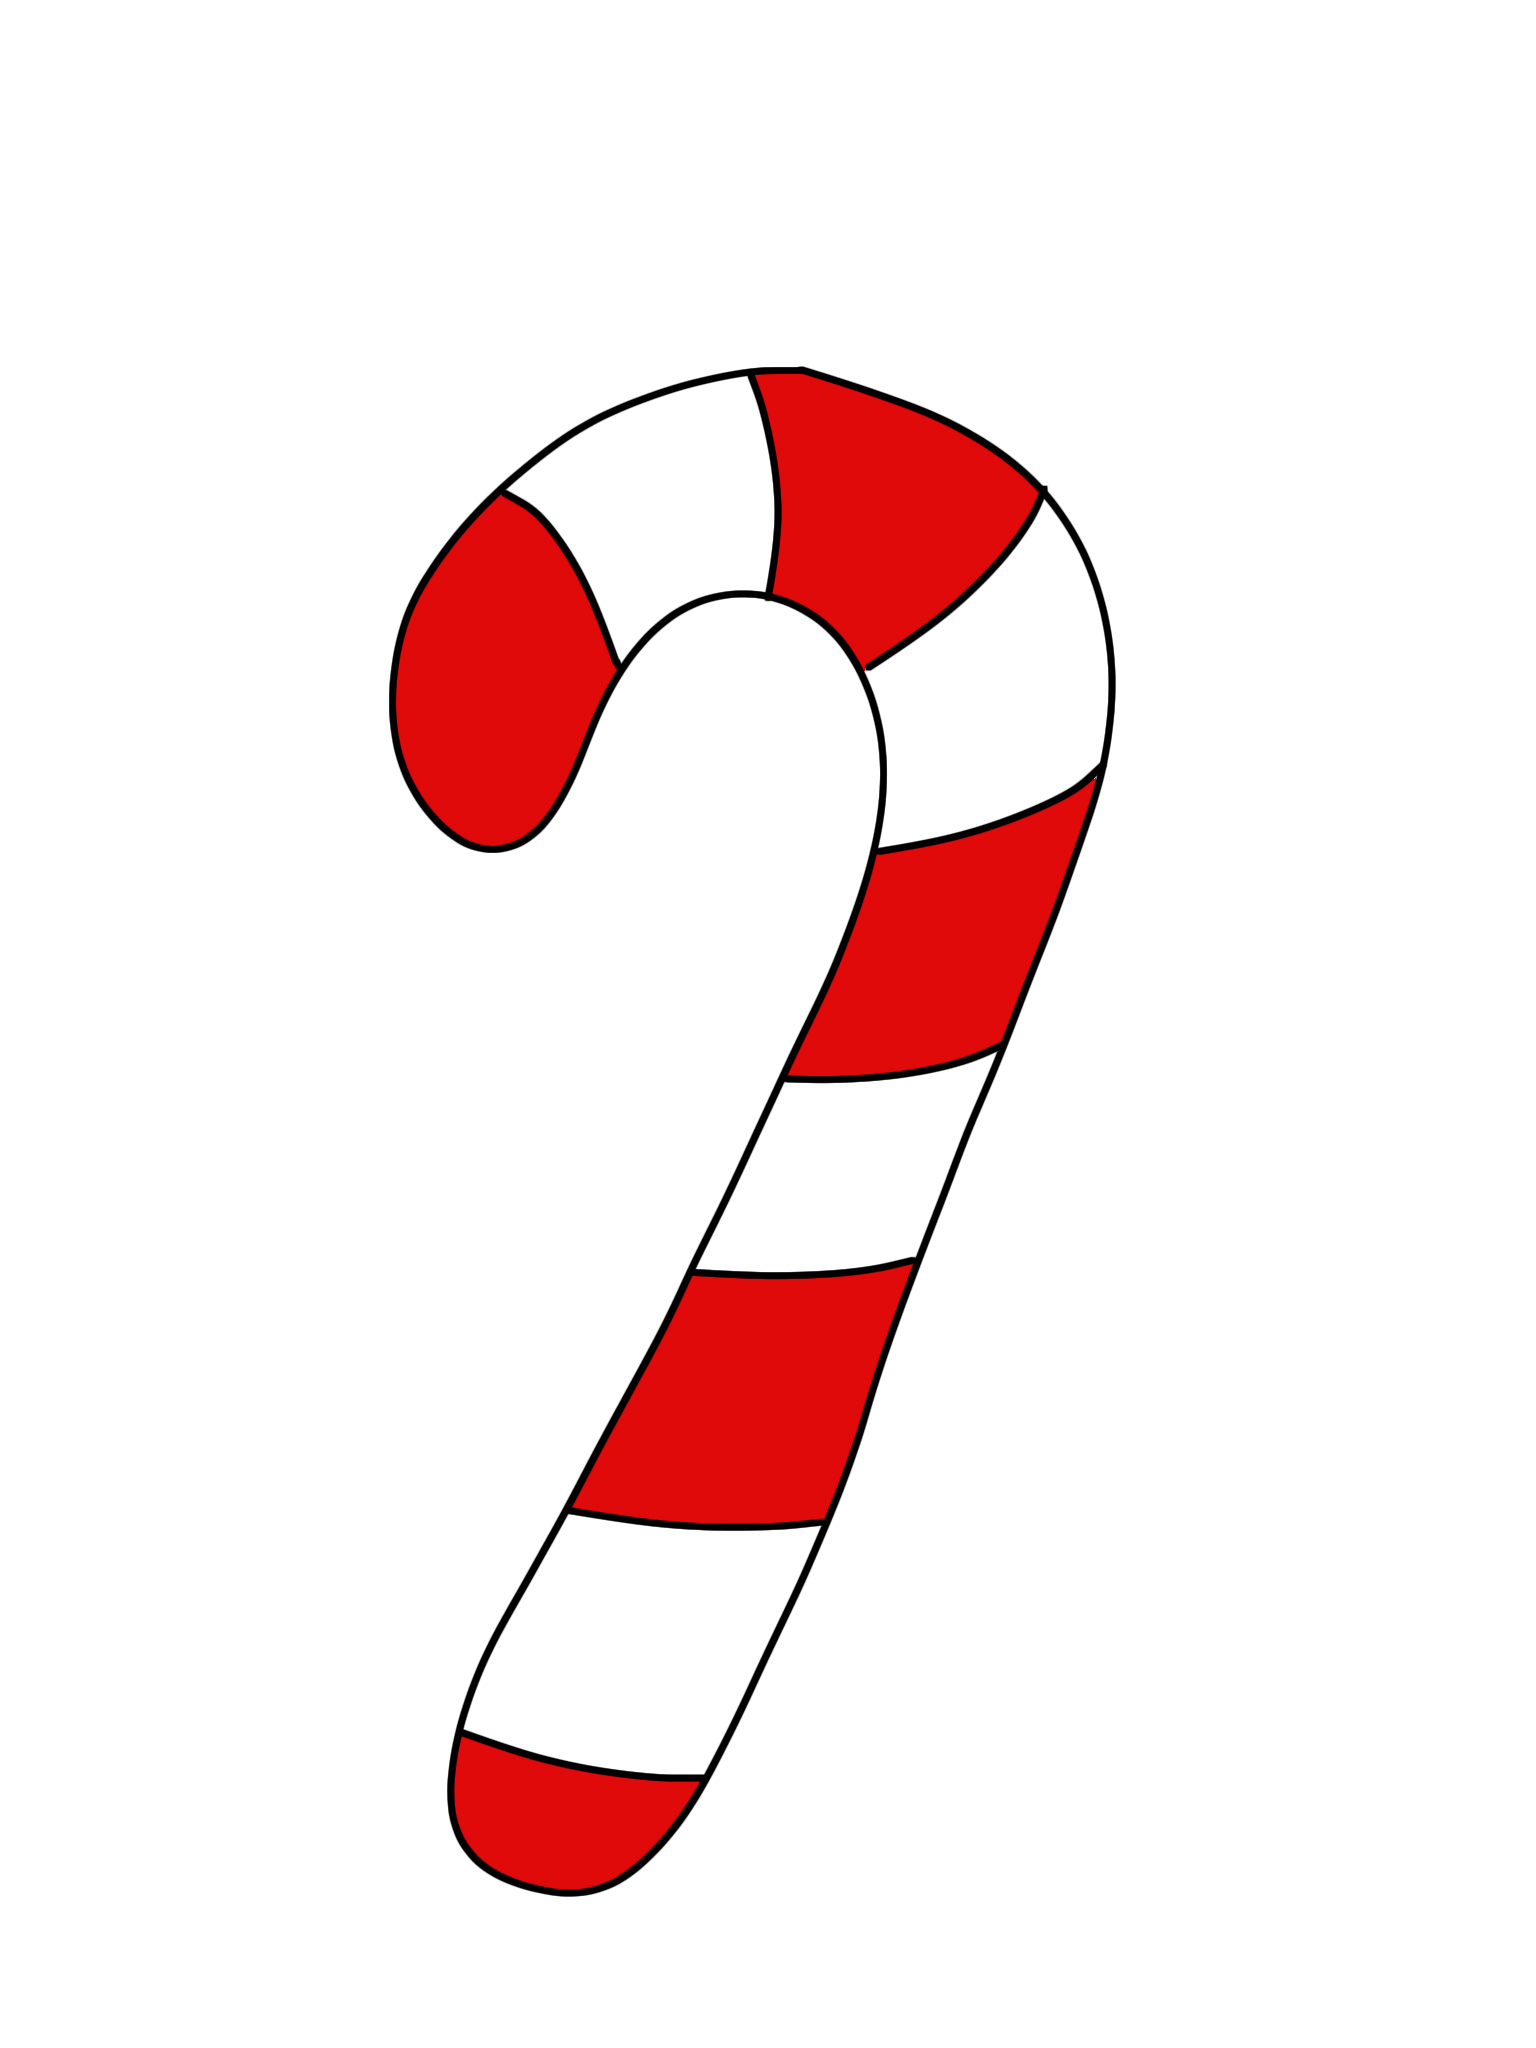 Candy cane clip art clipart free clipart microsoft clipart image 2